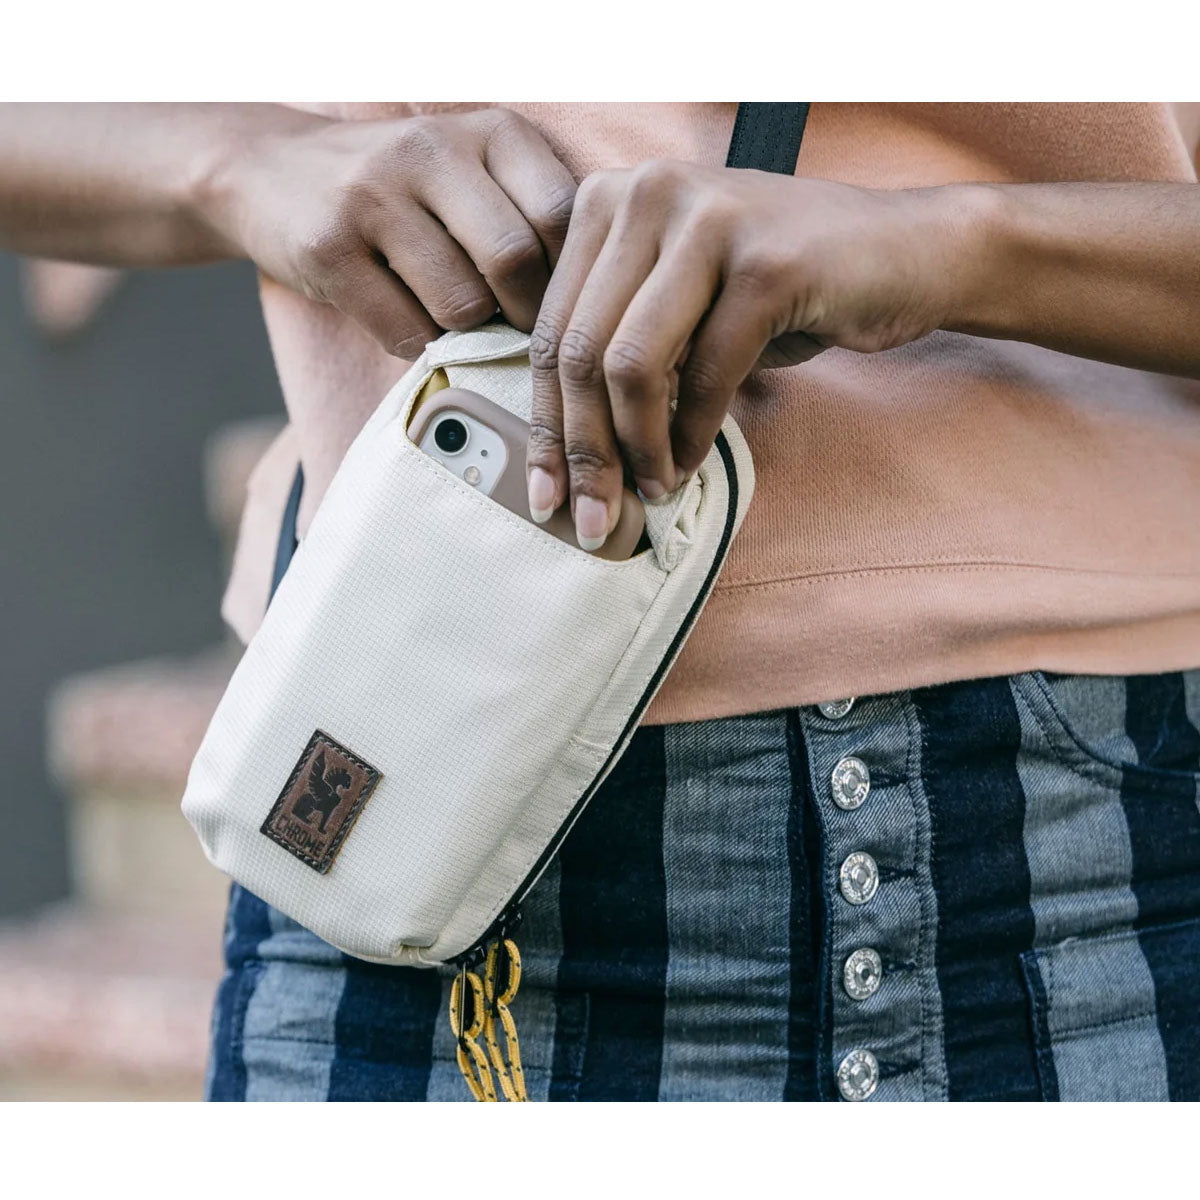 Chrome Industries : Ruckas Accessory Pouch